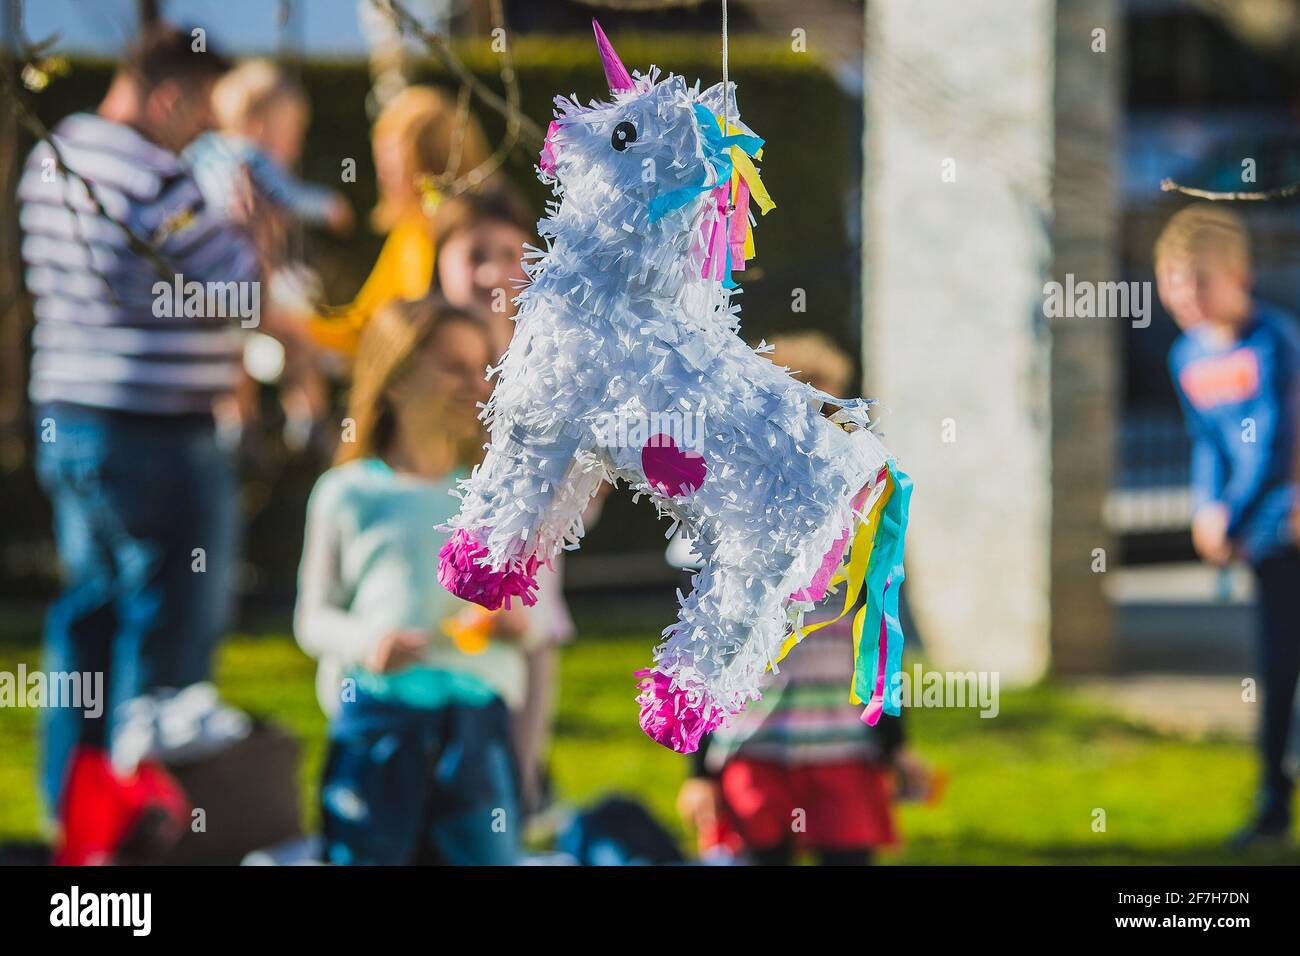 White colored donkey shaped pinata hanging on the tree with kids